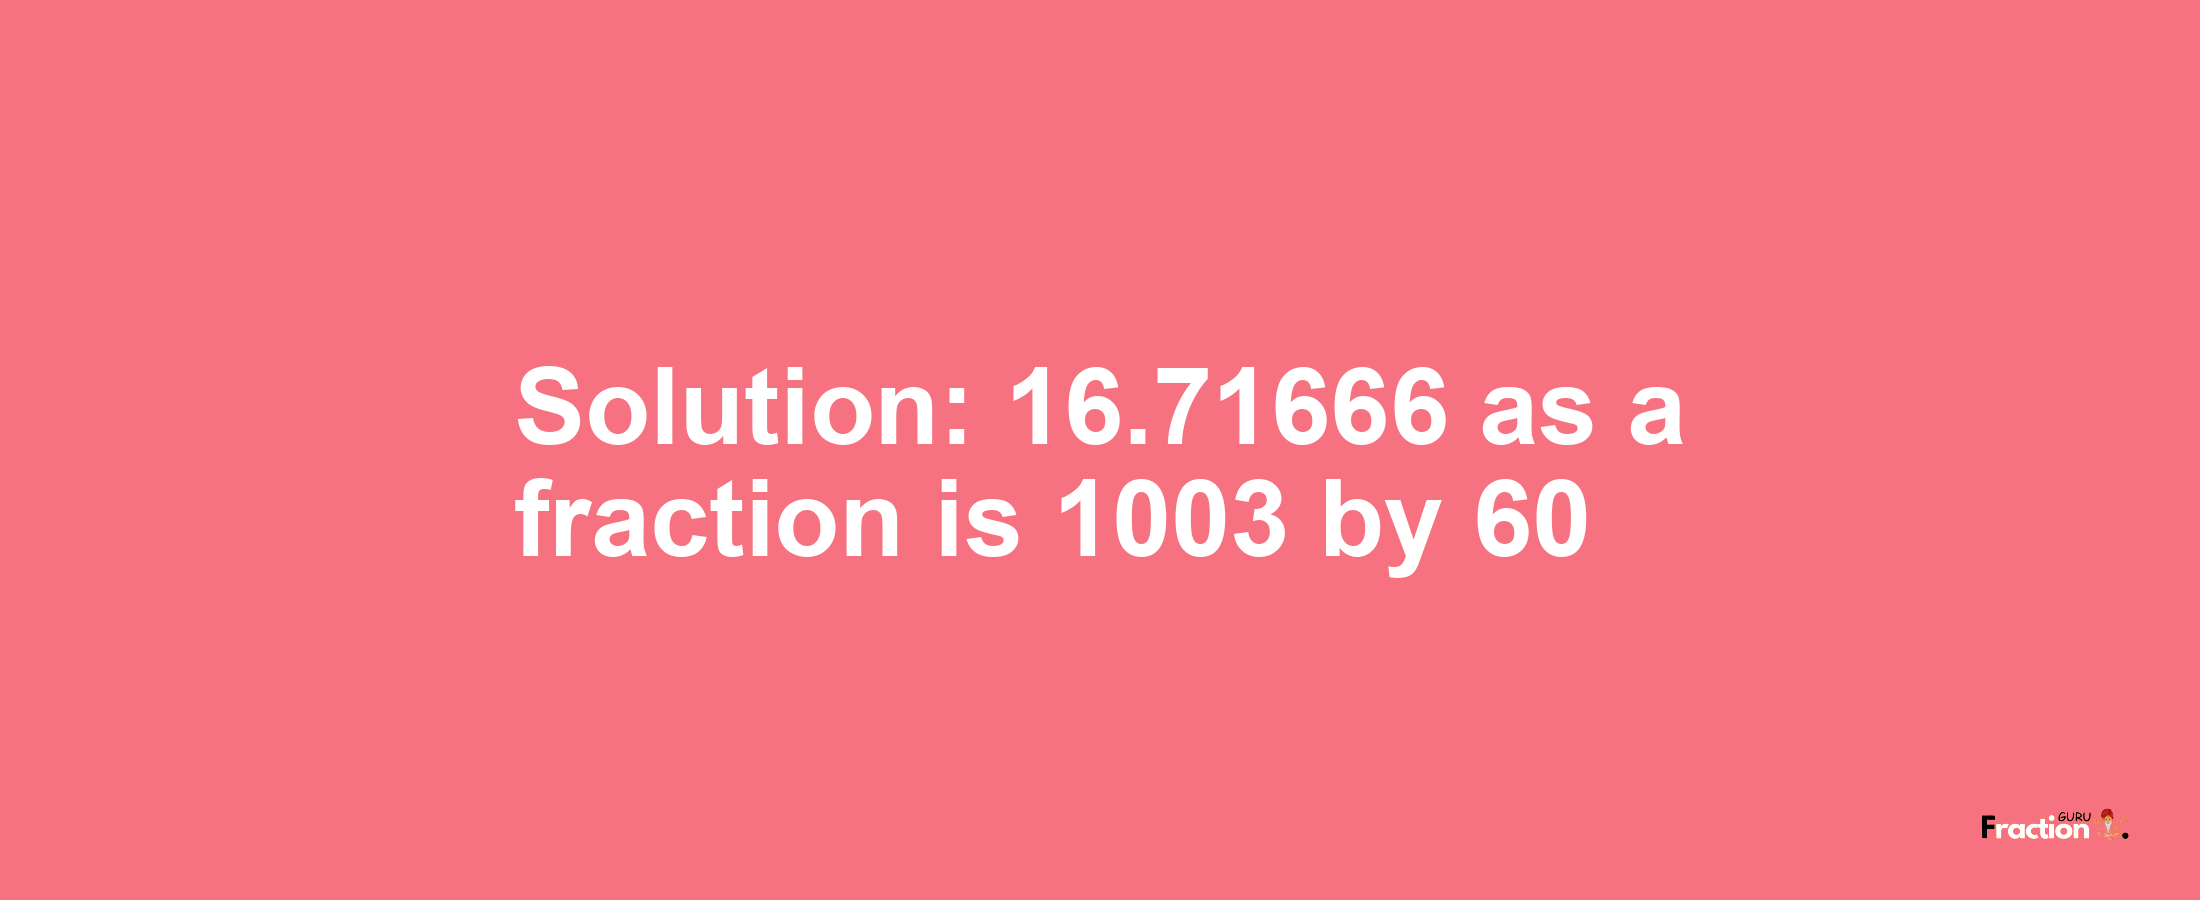 Solution:16.71666 as a fraction is 1003/60